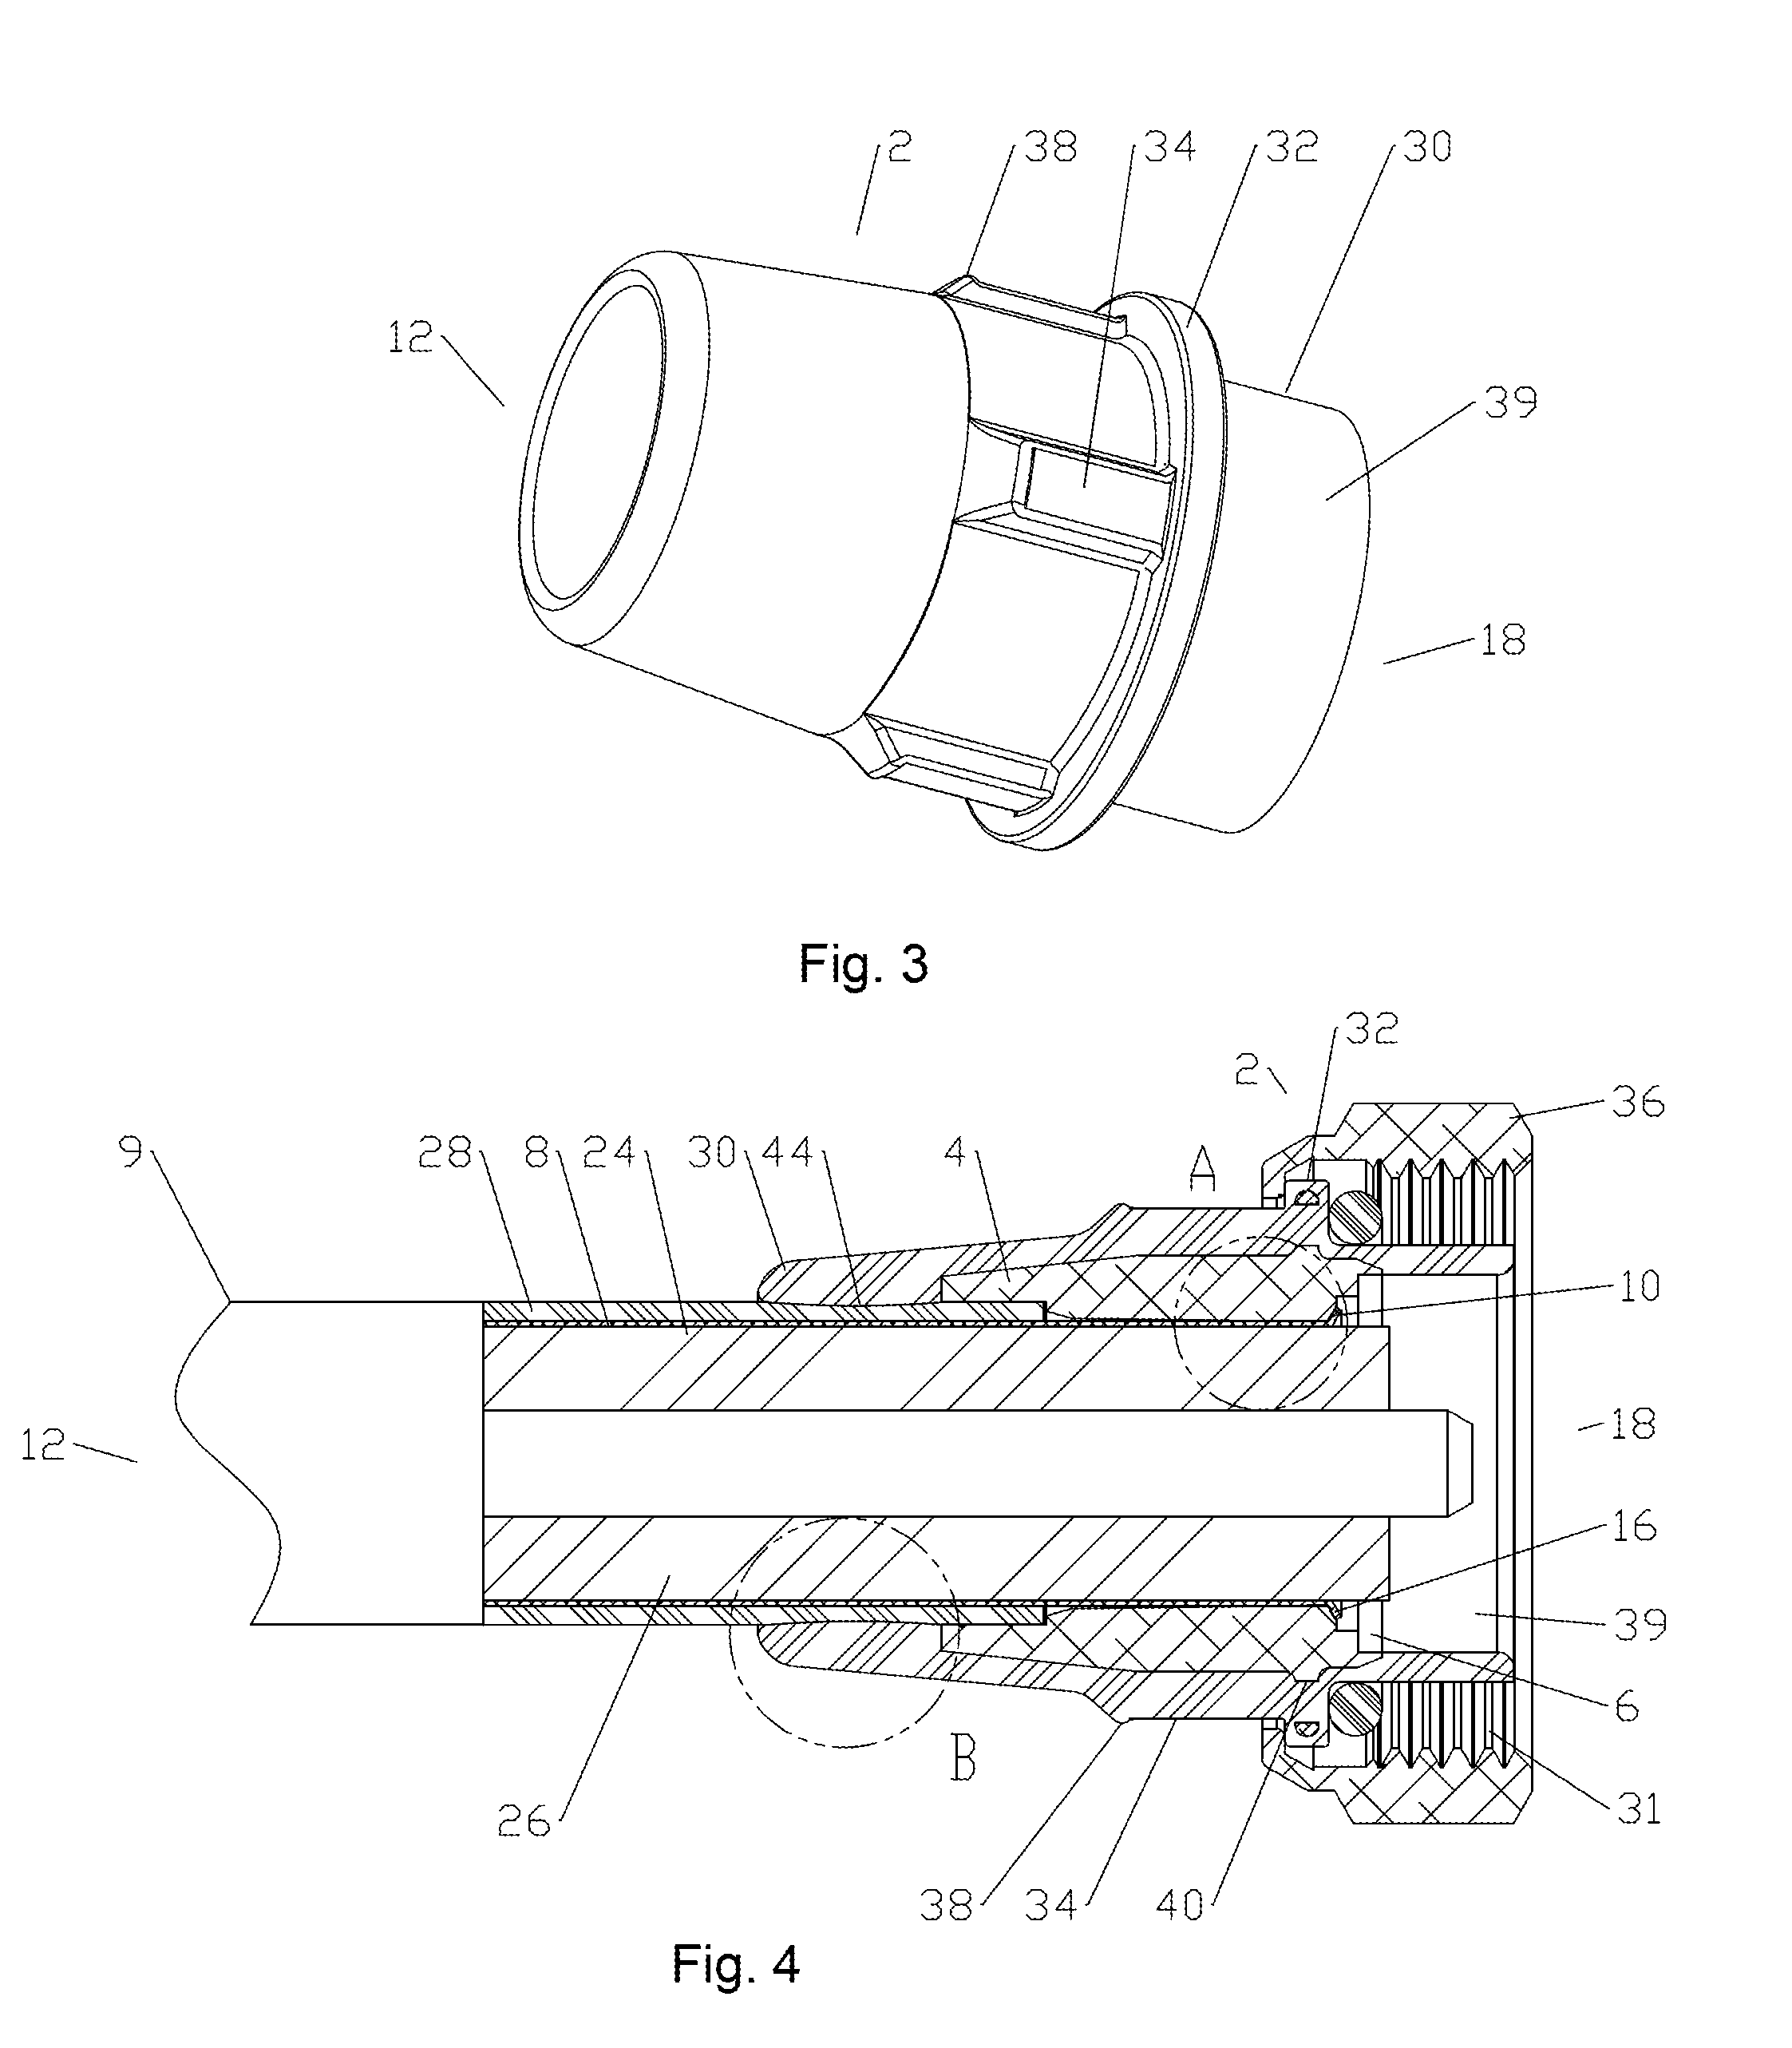 Method of interconnecting a coaxial connector to a coaxial cable via ultrasonic welding